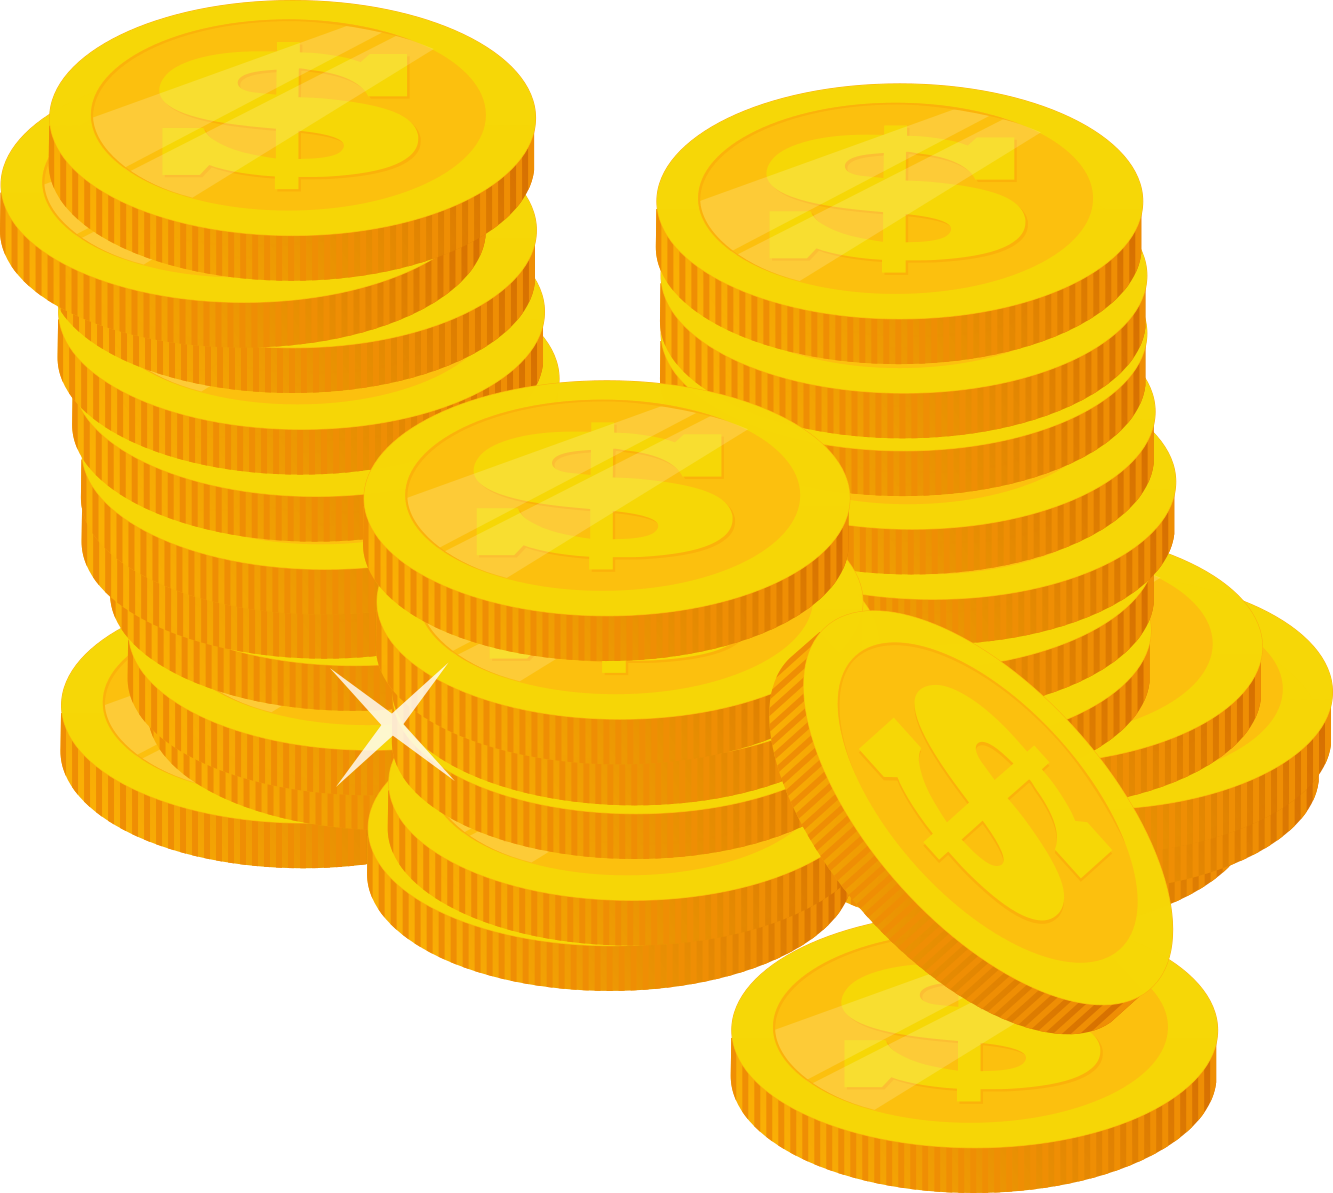 Coin Stack Investment PNG Image HD